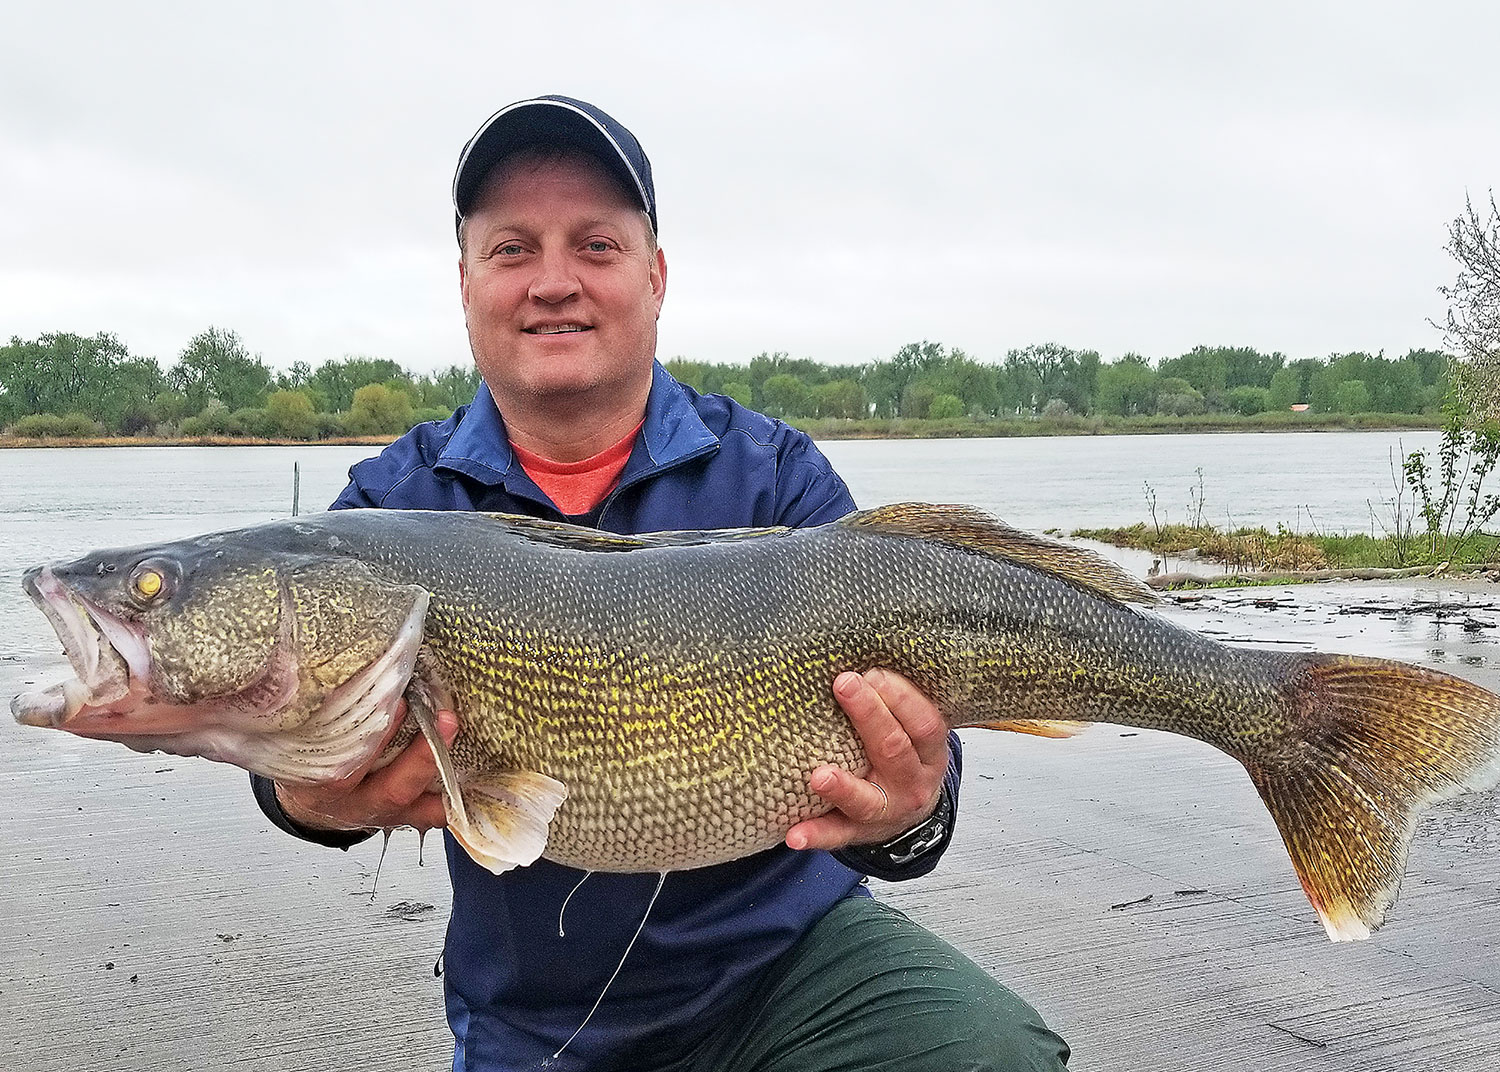 Neal Leier with his state record walleye